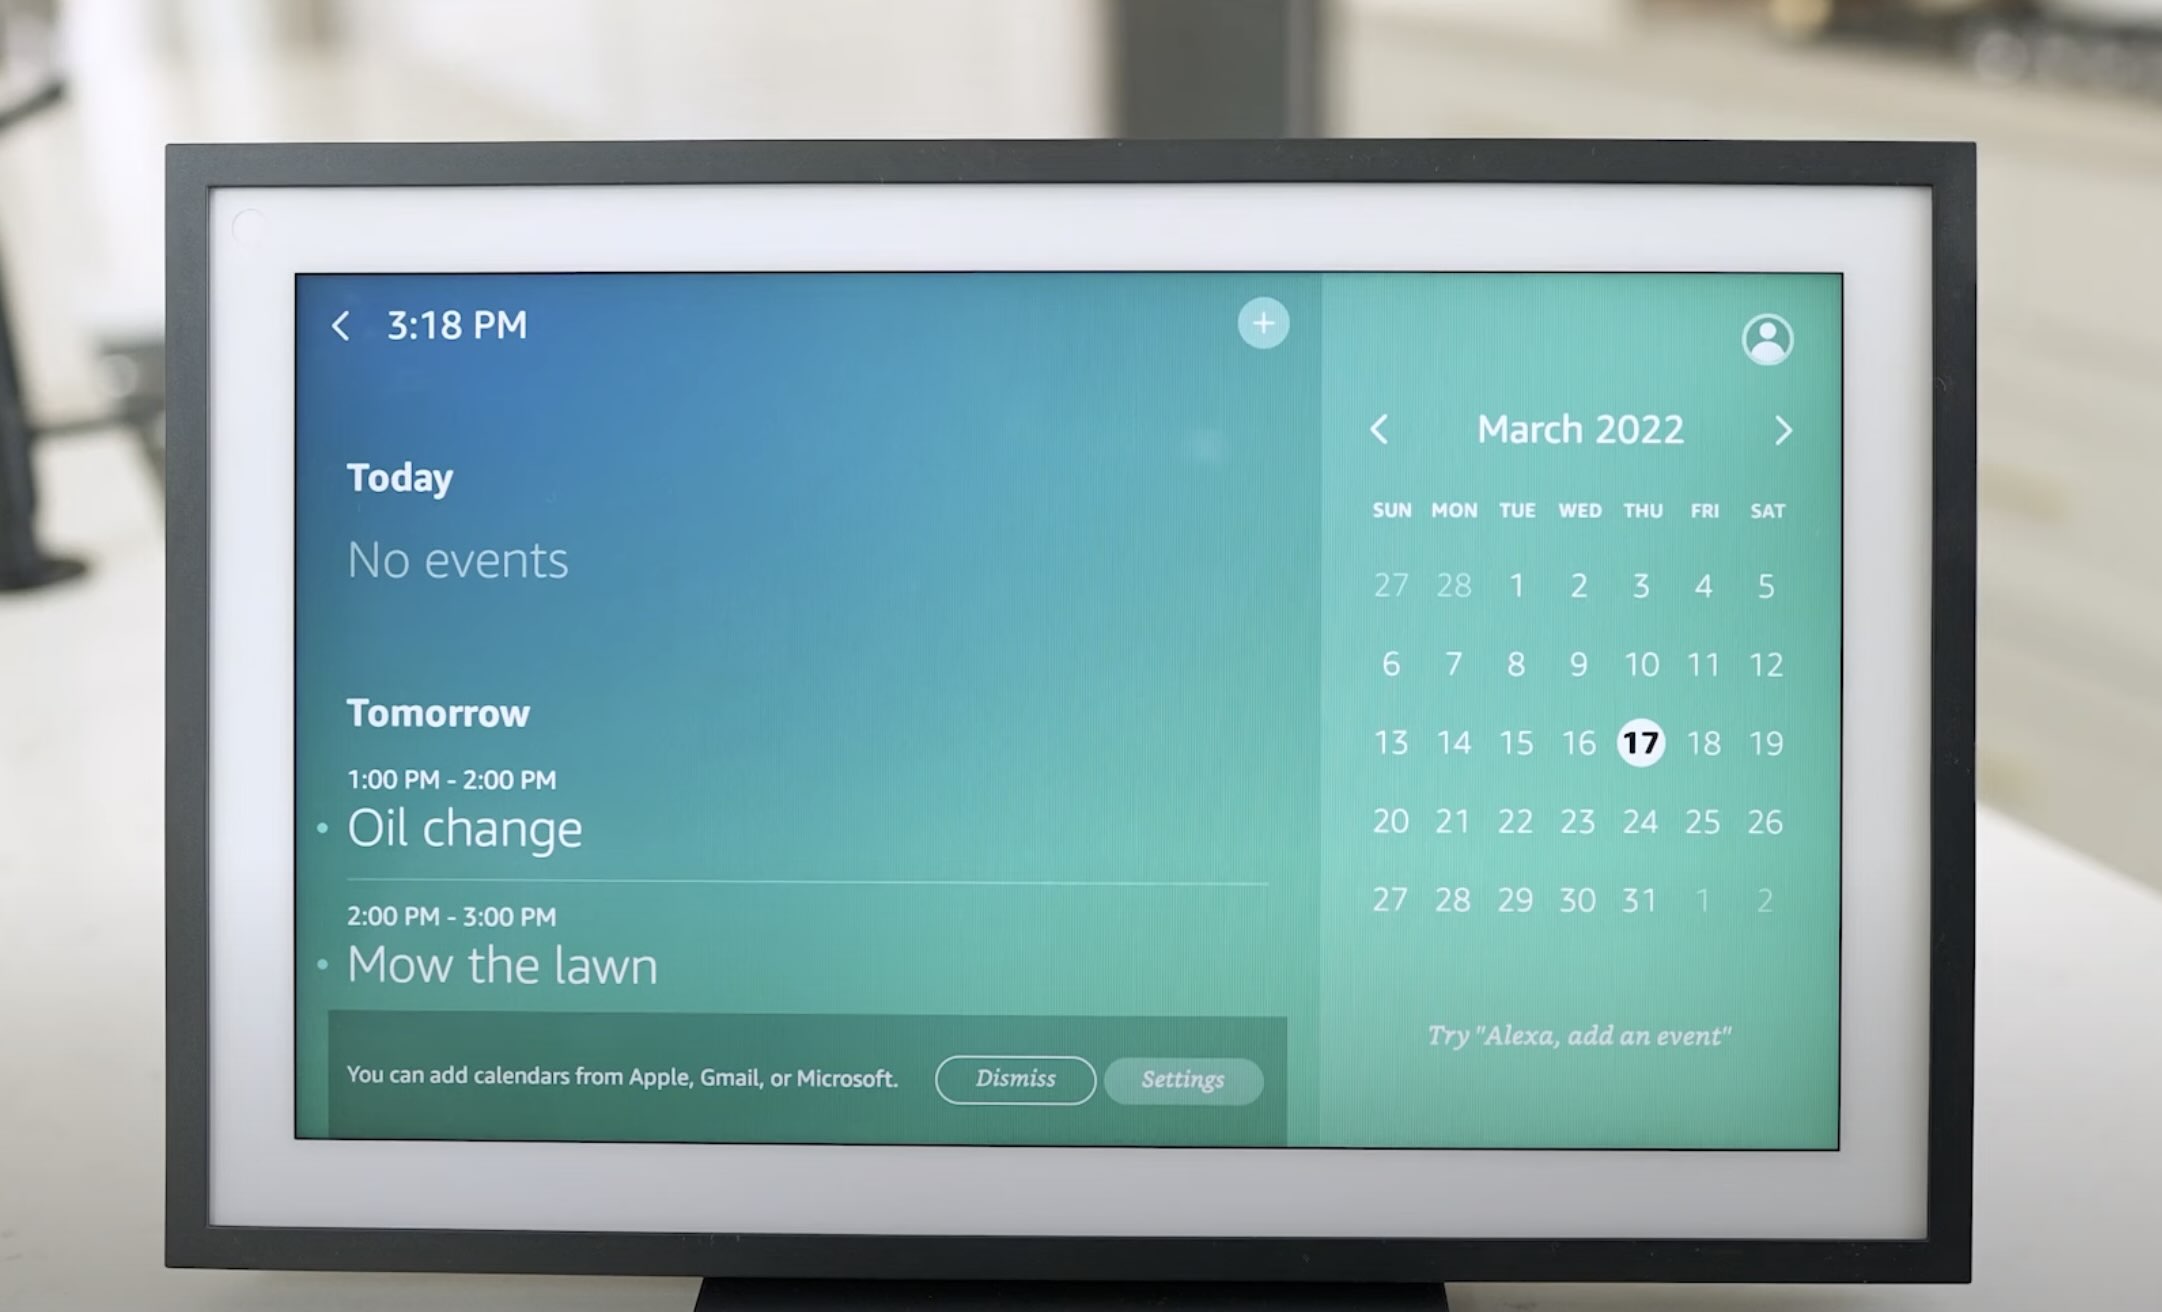 How To Add Events To Alexa Calendar